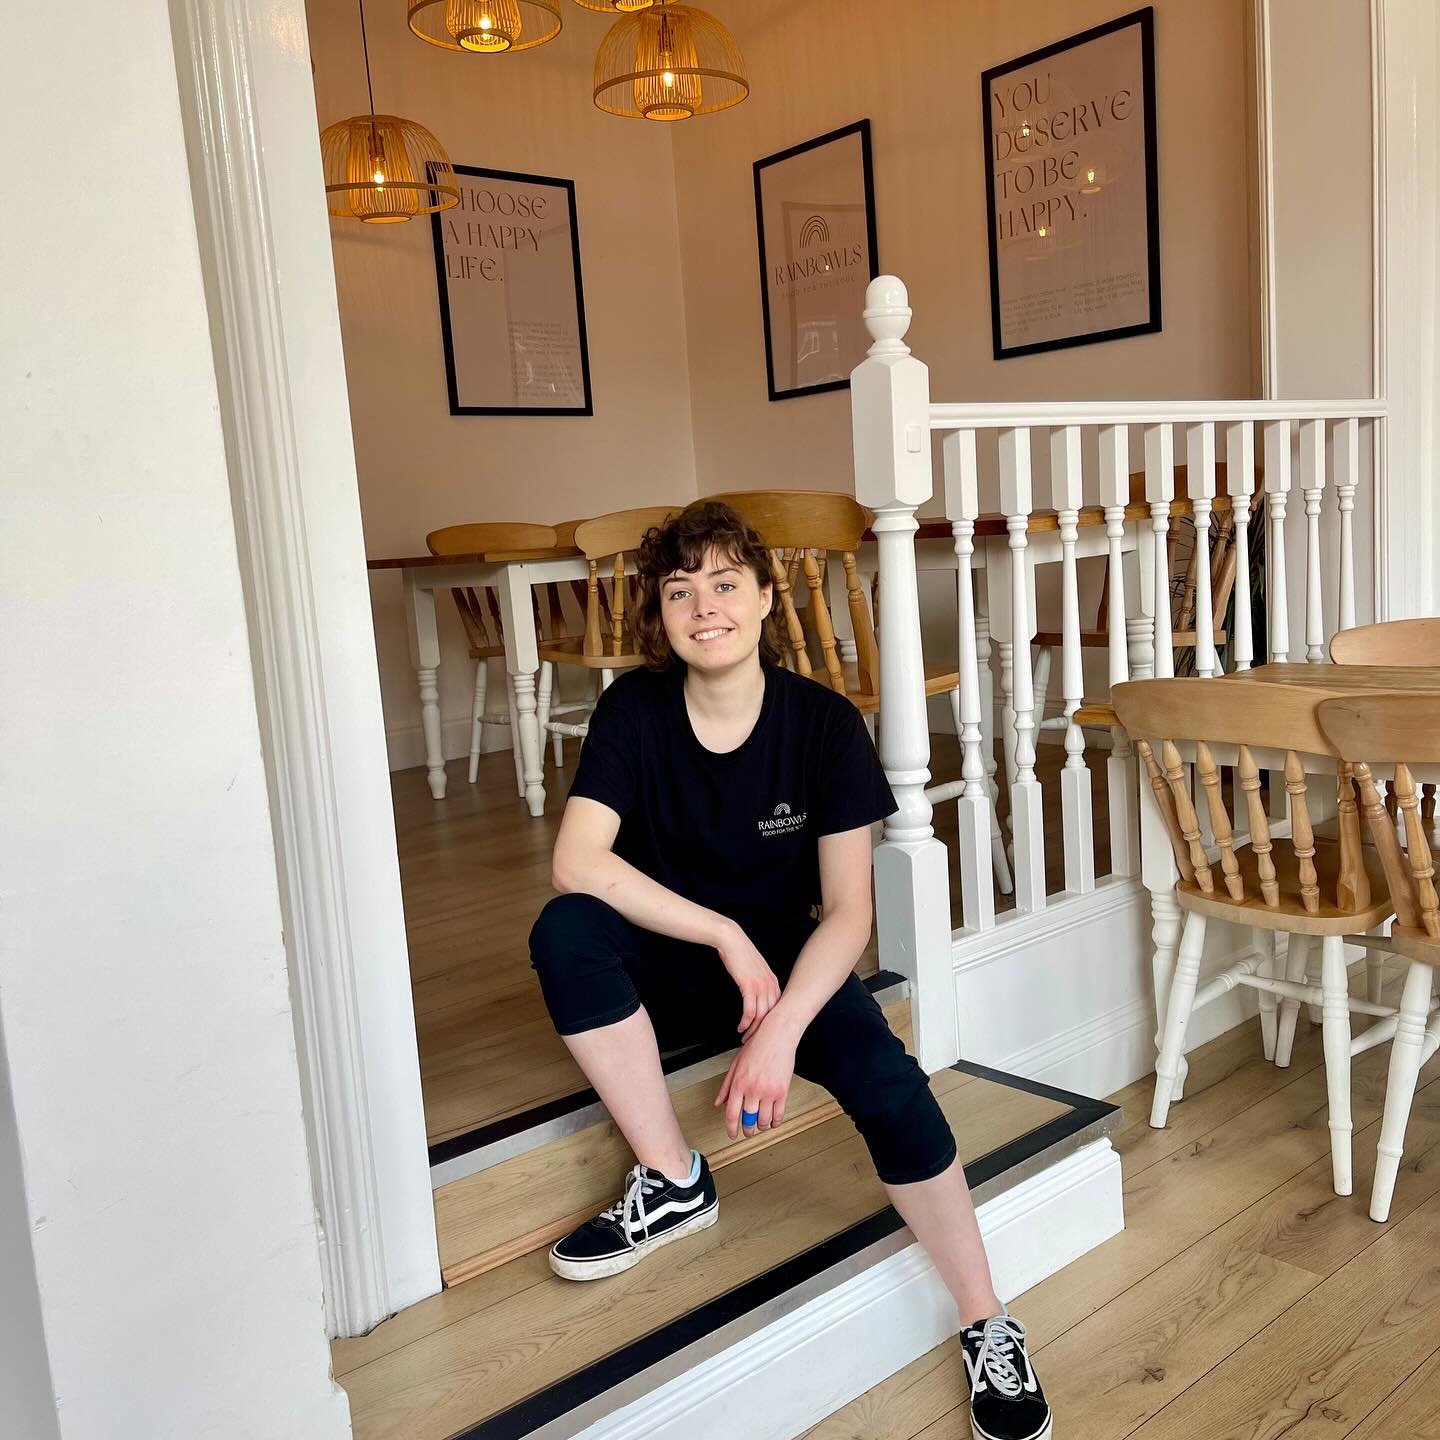 Get to know Olivia🌟, our amazing Cafe Assistant in Worcester! Although Olivia is new, she&rsquo;s learning quickly and can&rsquo;t wait to meet you all! ☕✨

Hello Olivia&hellip;

How Old Are You? 
I am 19 years old

Where Do You Live?
Worcester

Tel